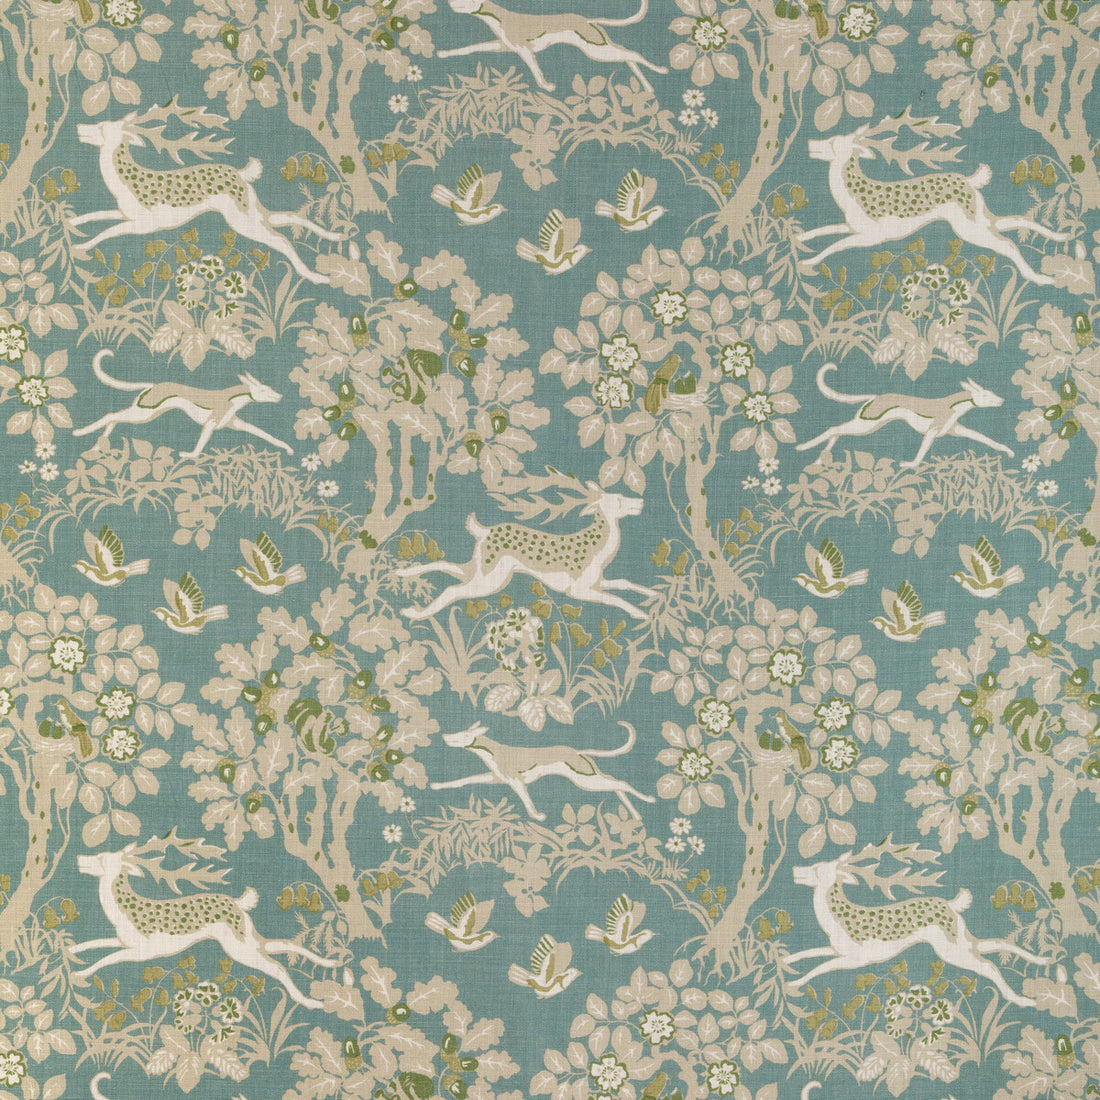 Mille Fleur Print fabric in lake color - pattern 2023122.353.0 - by Lee Jofa in the Lee Jofa 200 collection